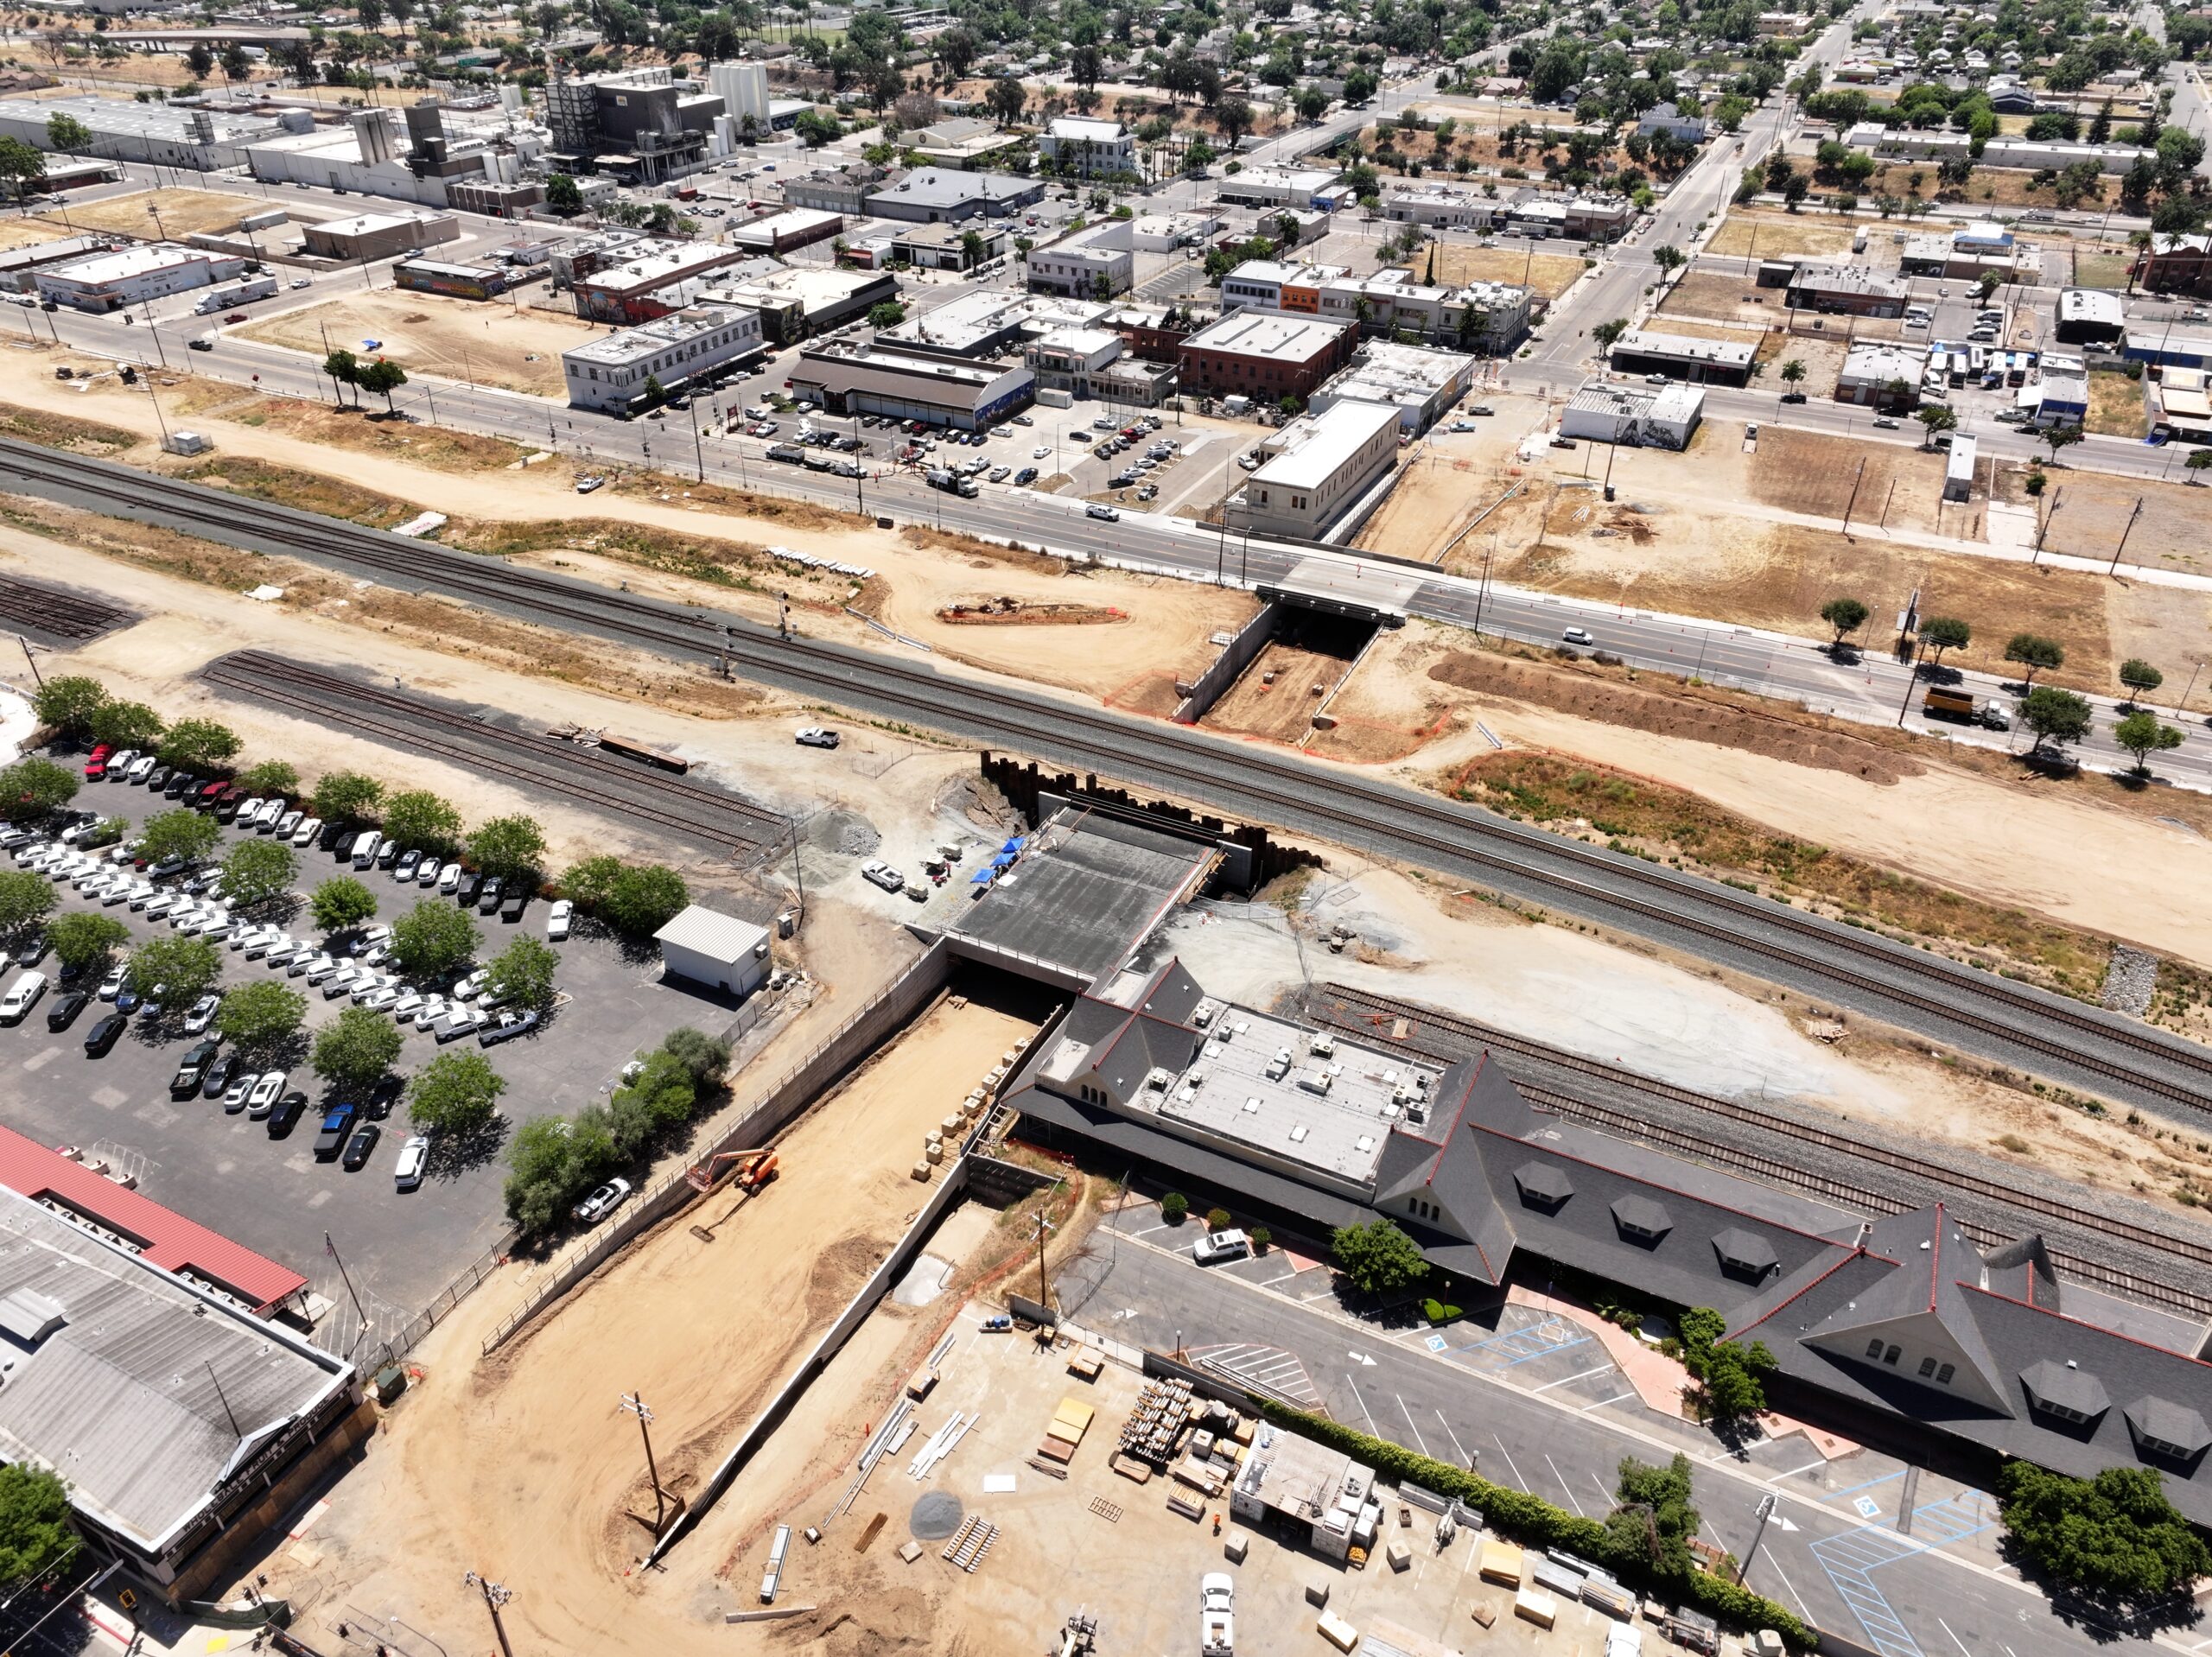 Tulare Street Underpass (drone view)